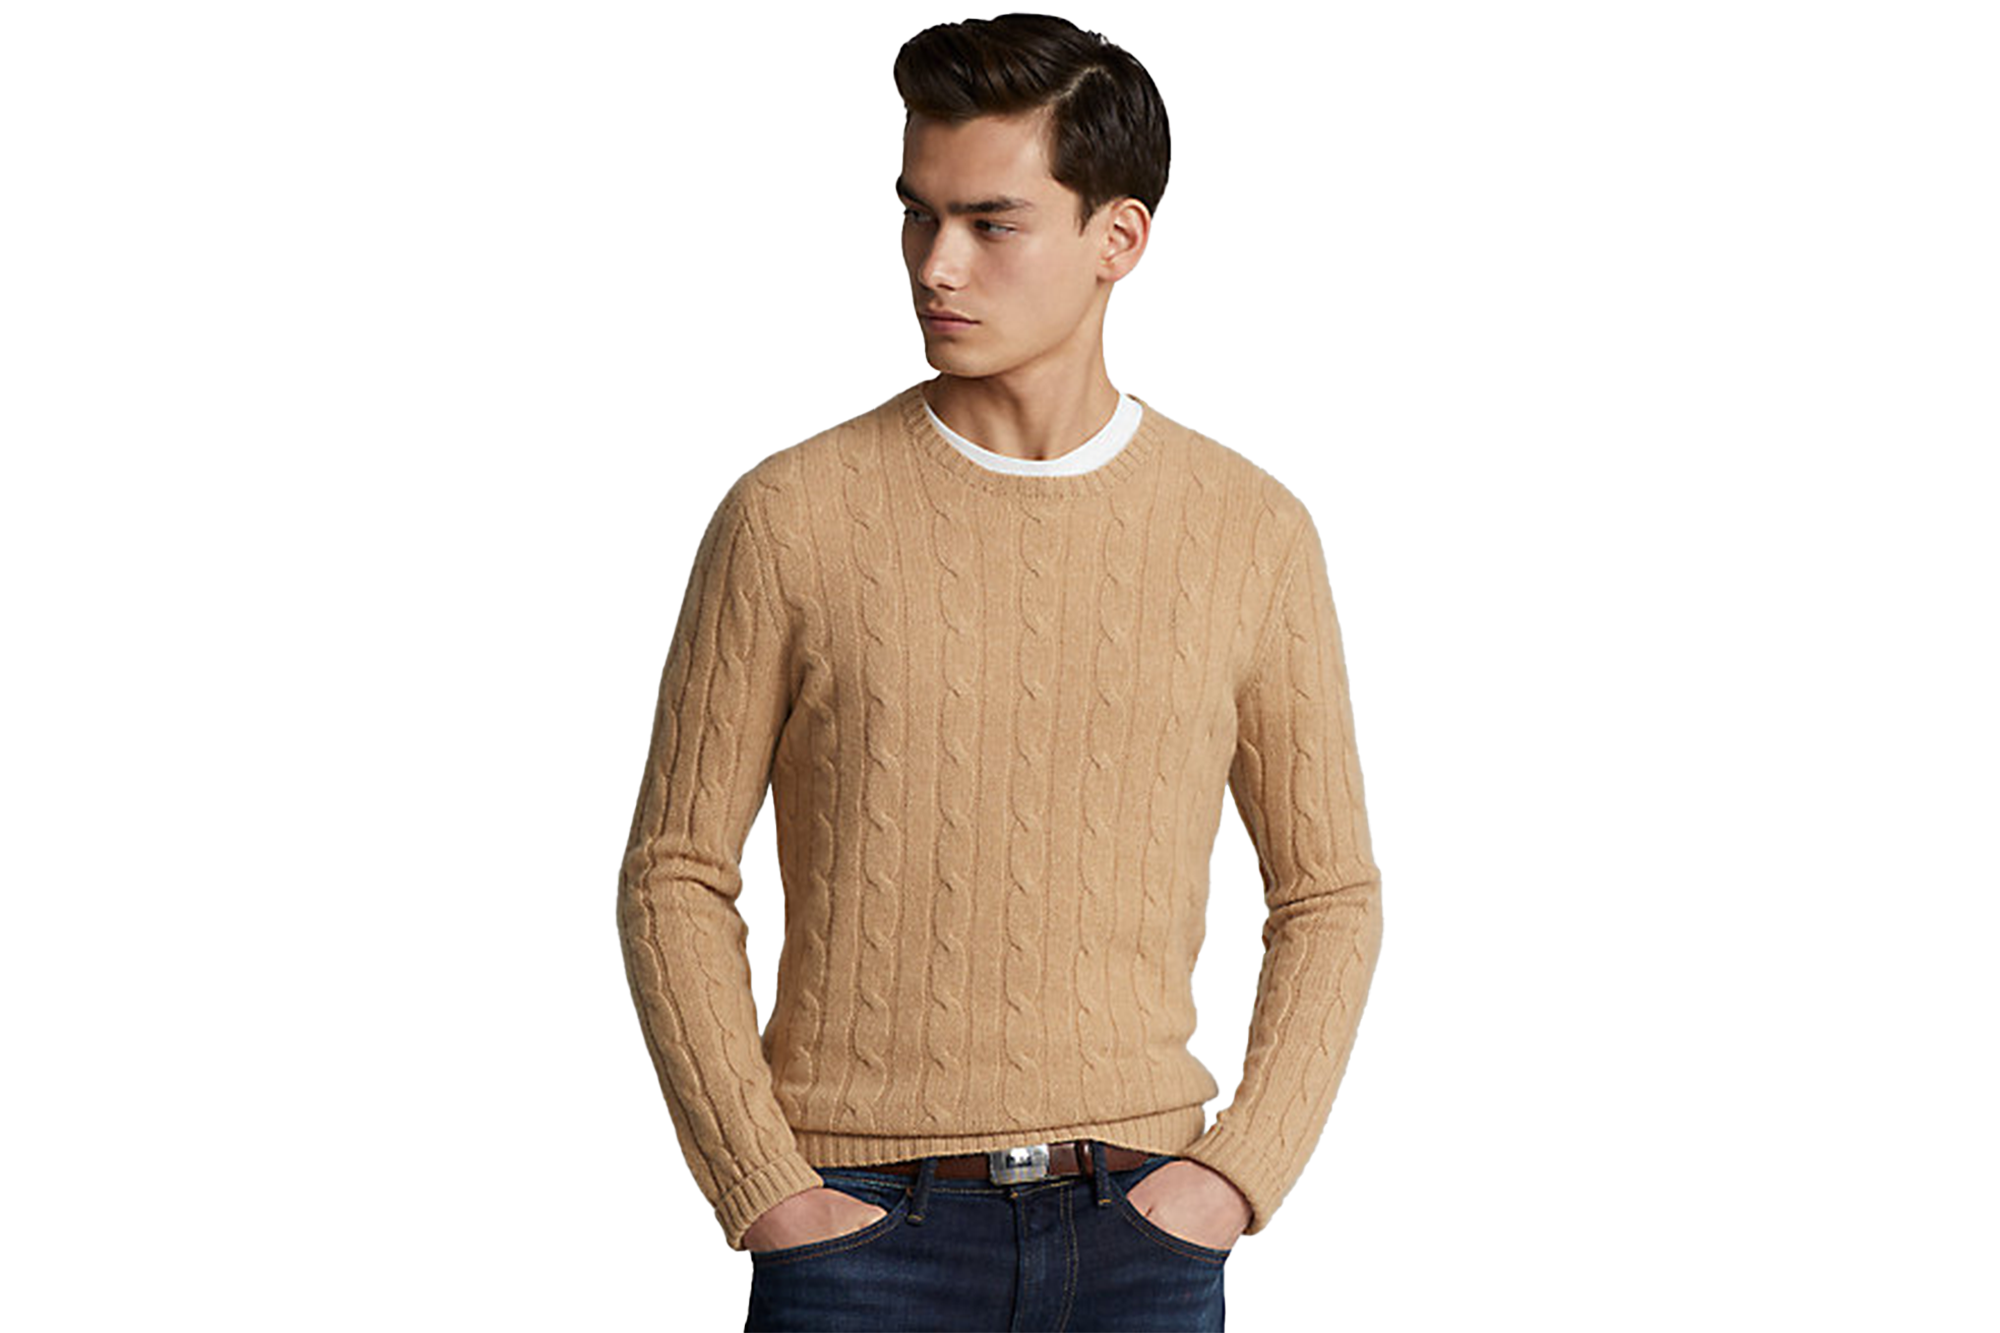 Are Cashmere Sweaters the Perfect Men's Sweater